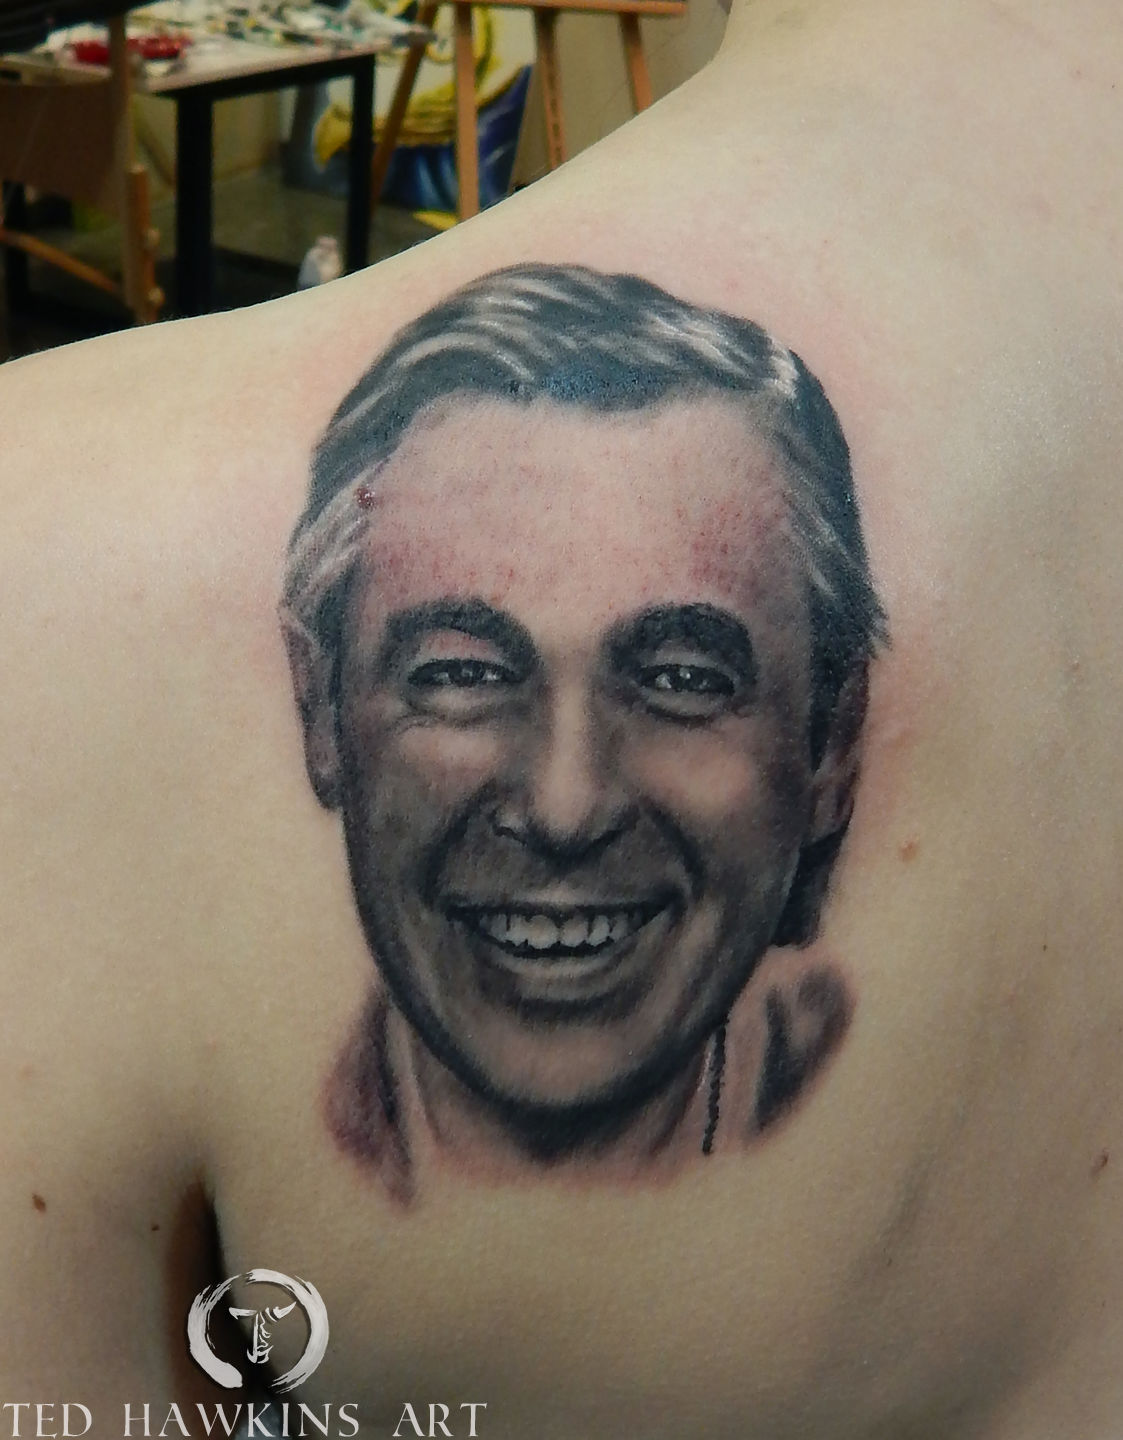 The Truth About The Mr Rogers Tattoo Rumors